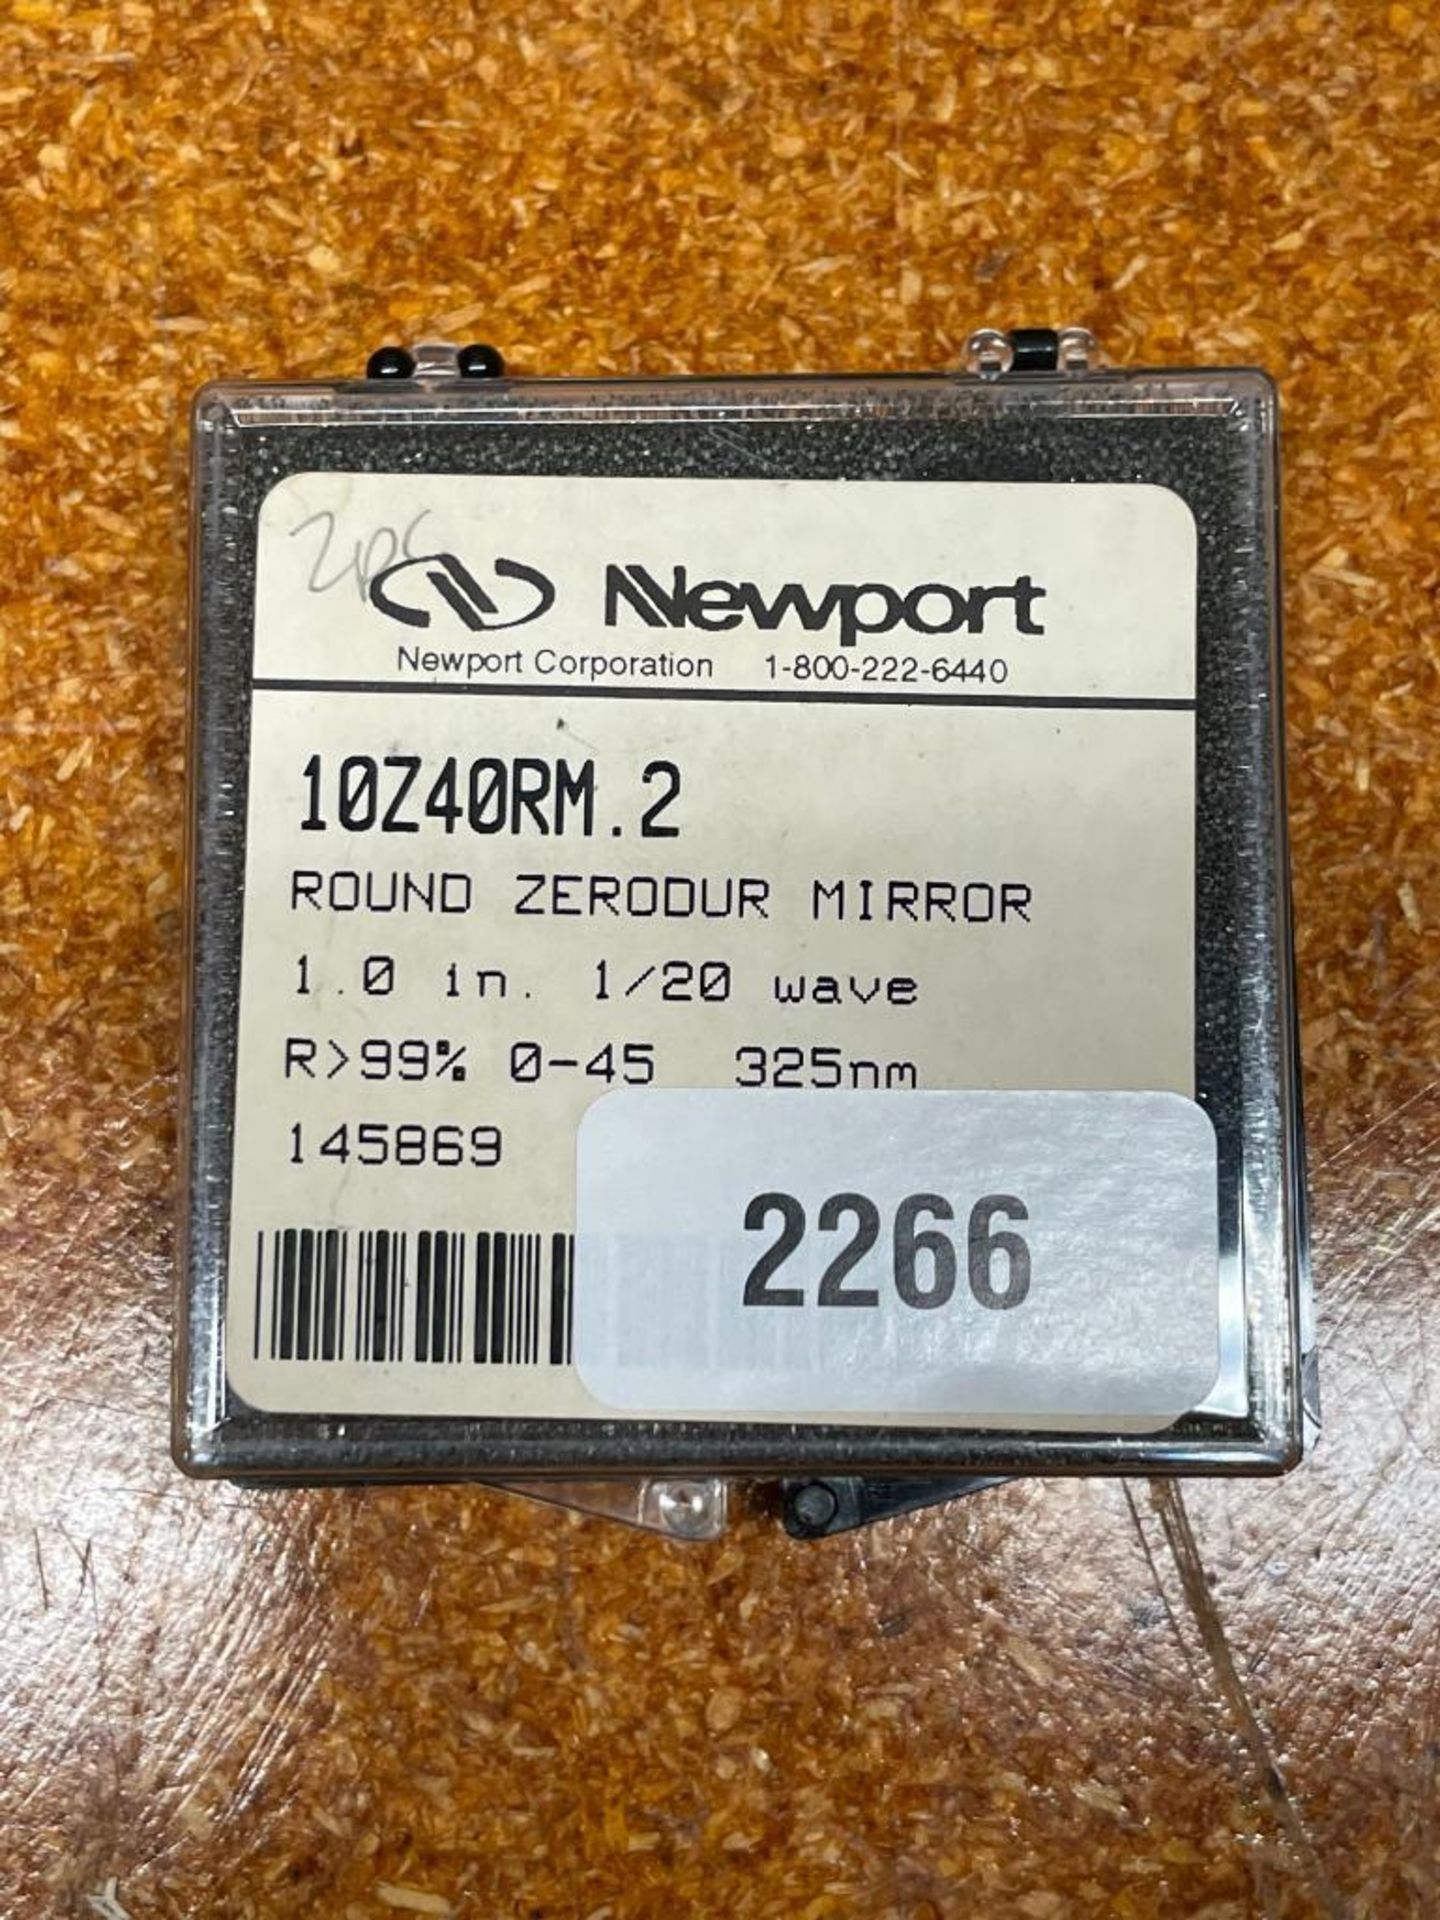 1" ZERODOUR MIRROR BRAND/MODEL: NEWPORT INFORMATION: R>99%, 0-45 DEGREES FOR 325 nm QTY: 1 - Image 2 of 2